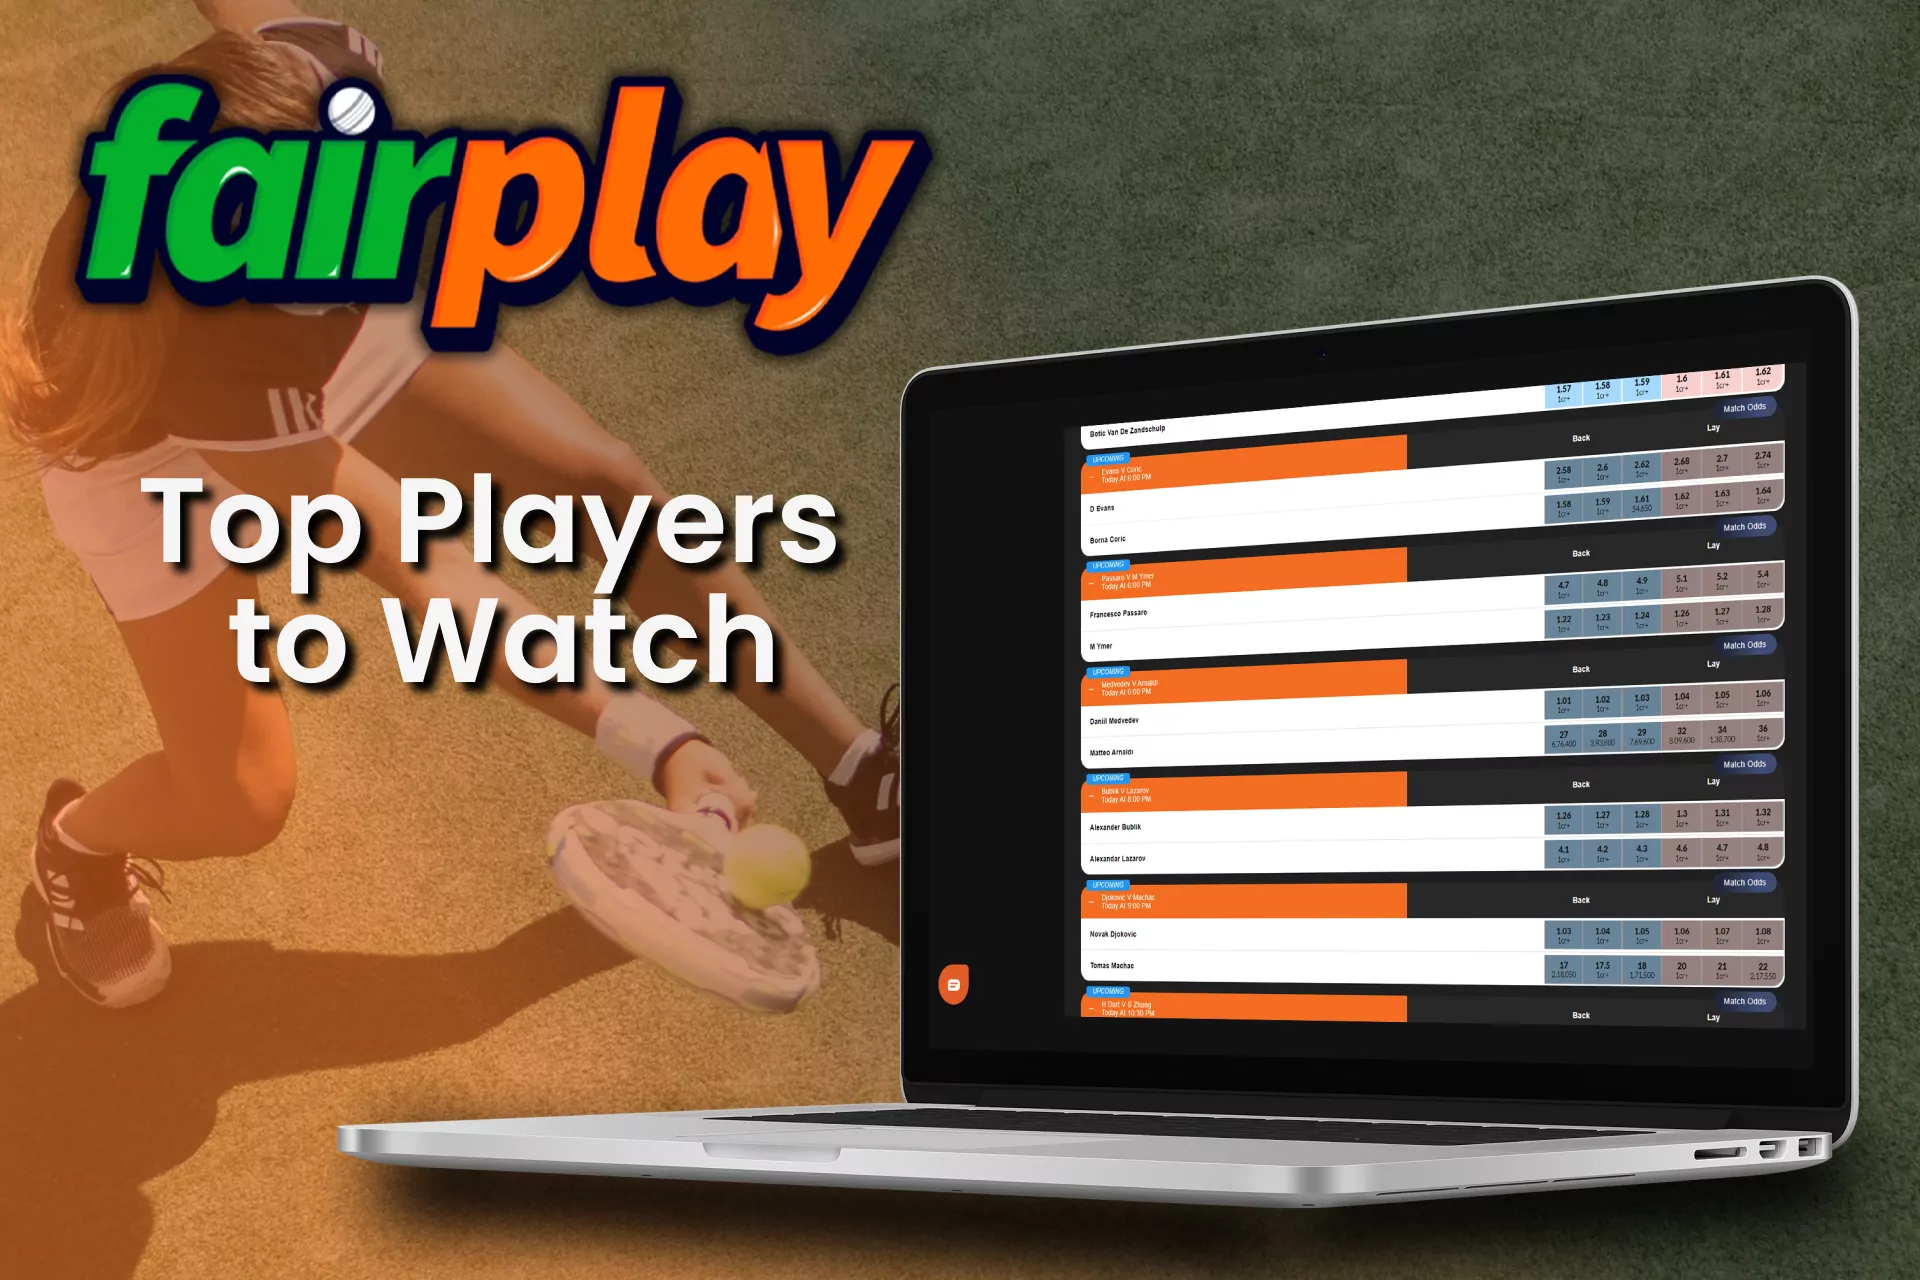 Follow the best tennis players with Fairplay.